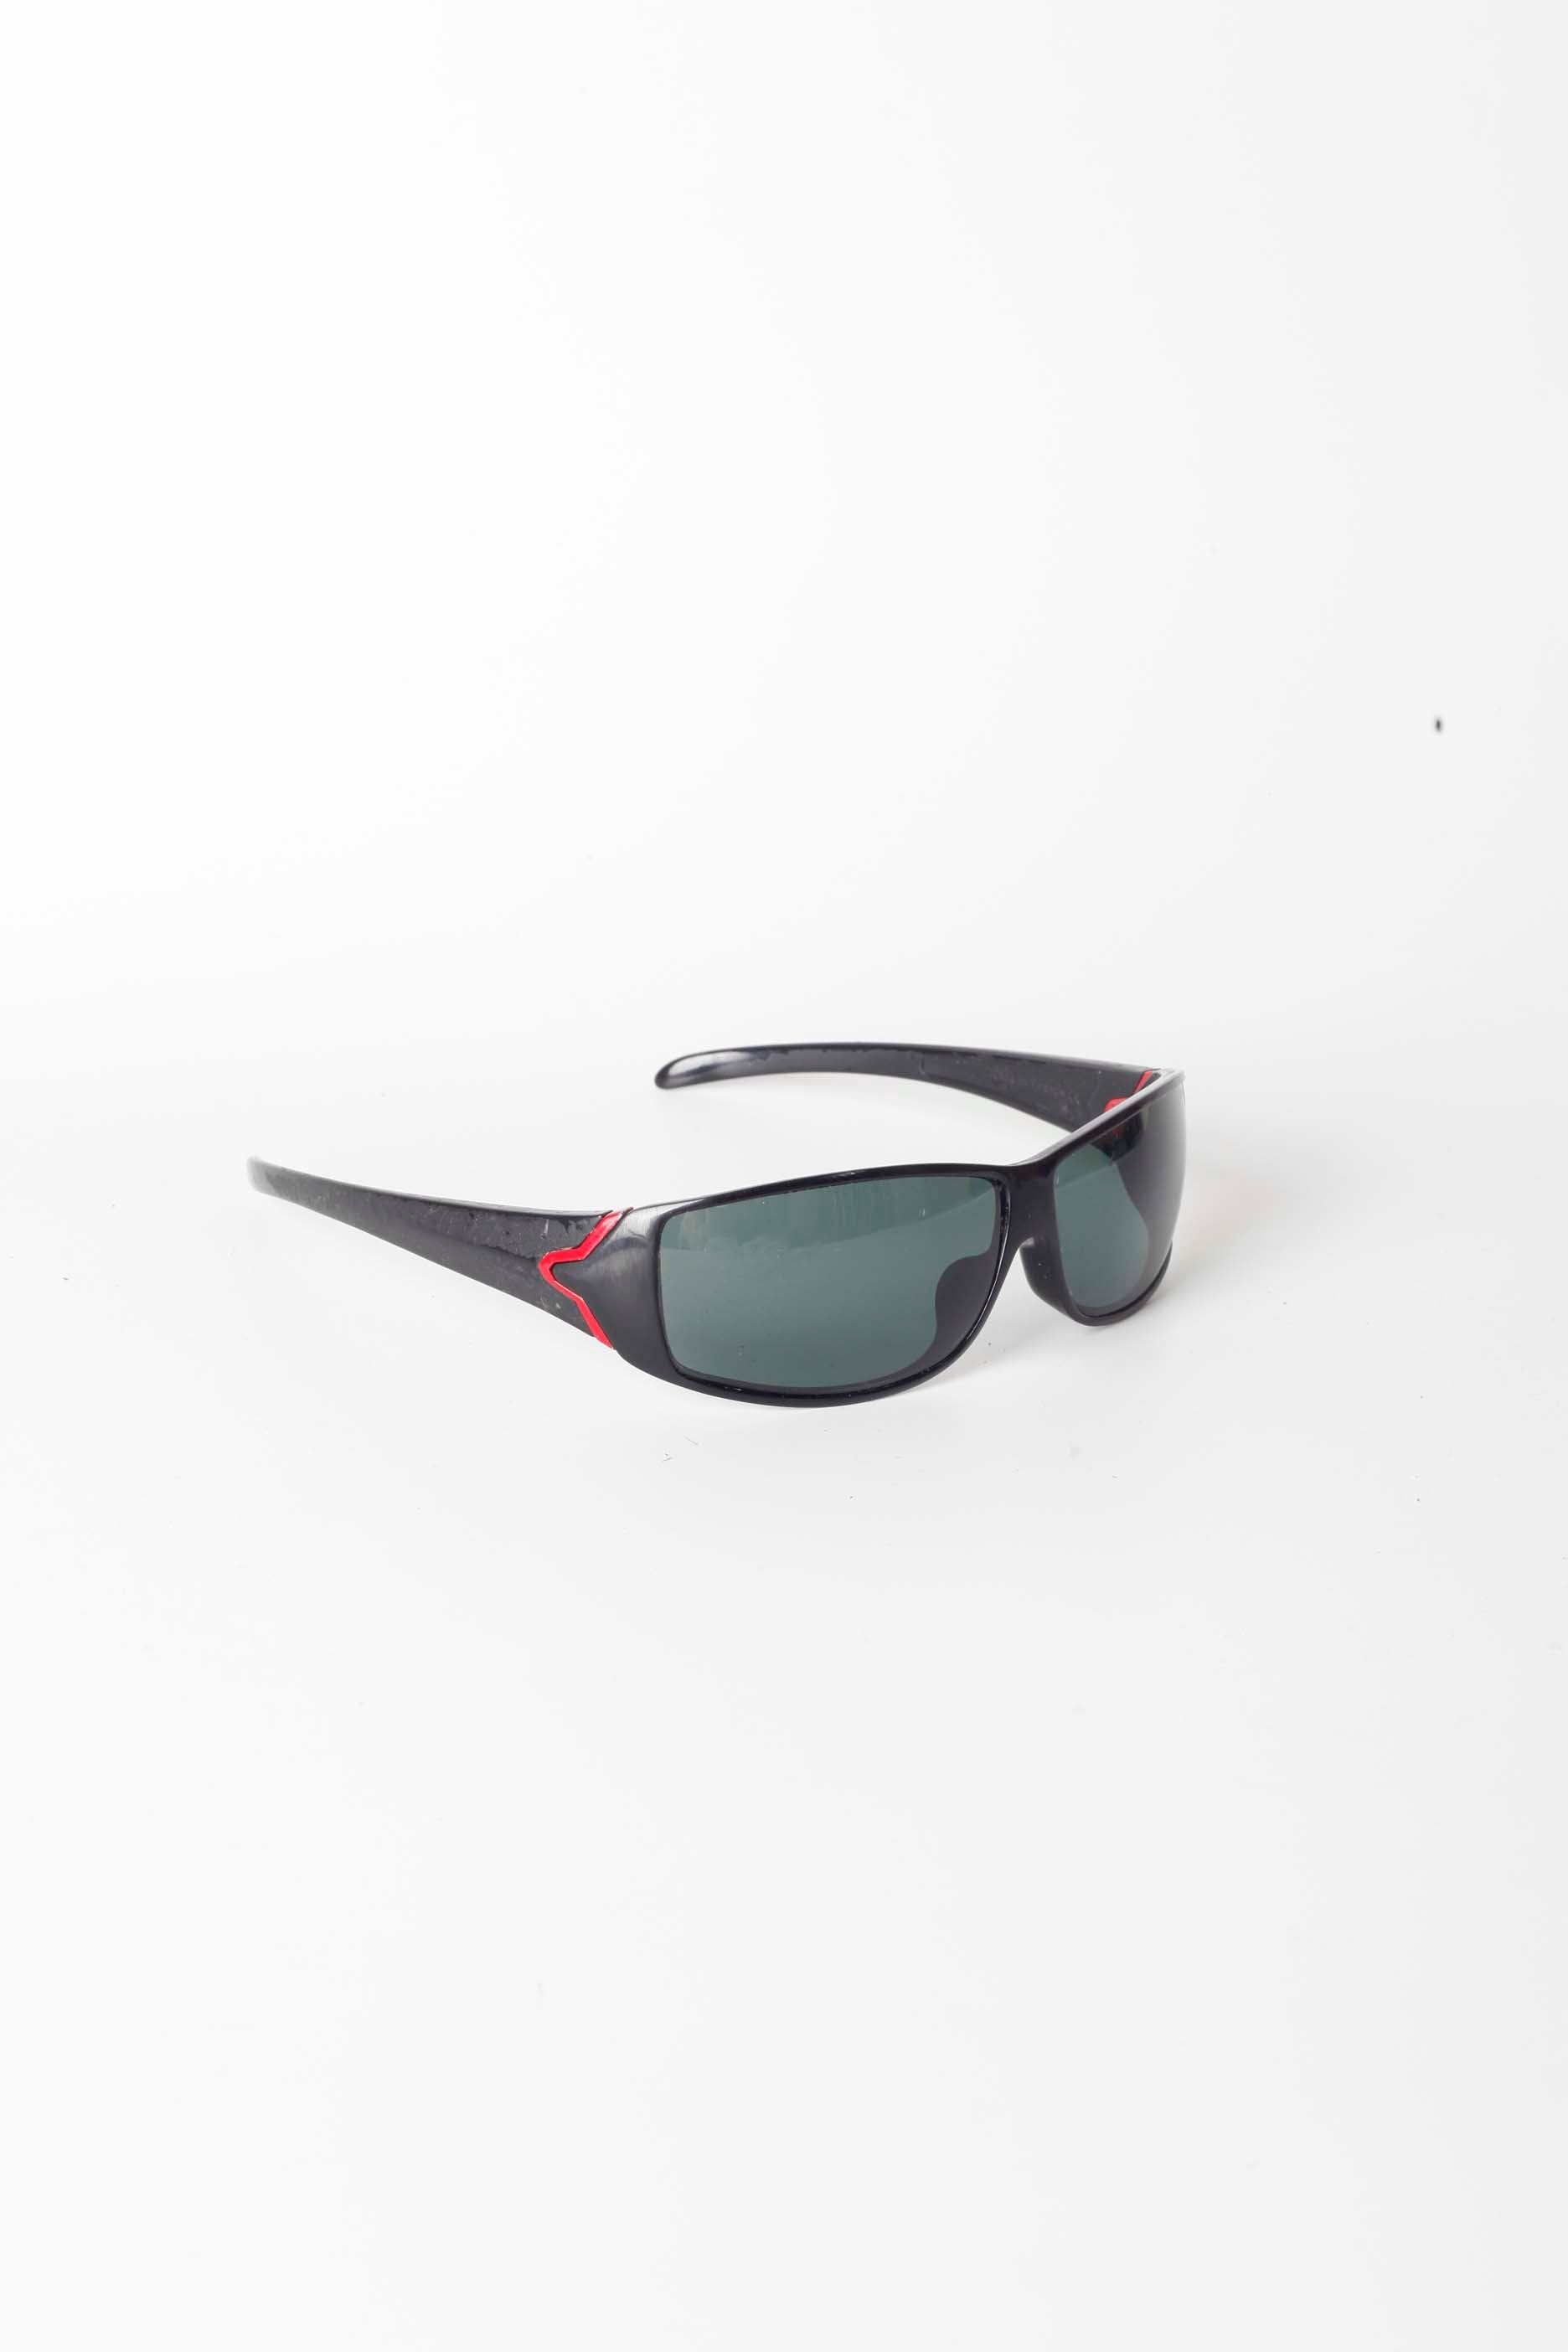 Black Wrap Around Sunglasses with Red Detail